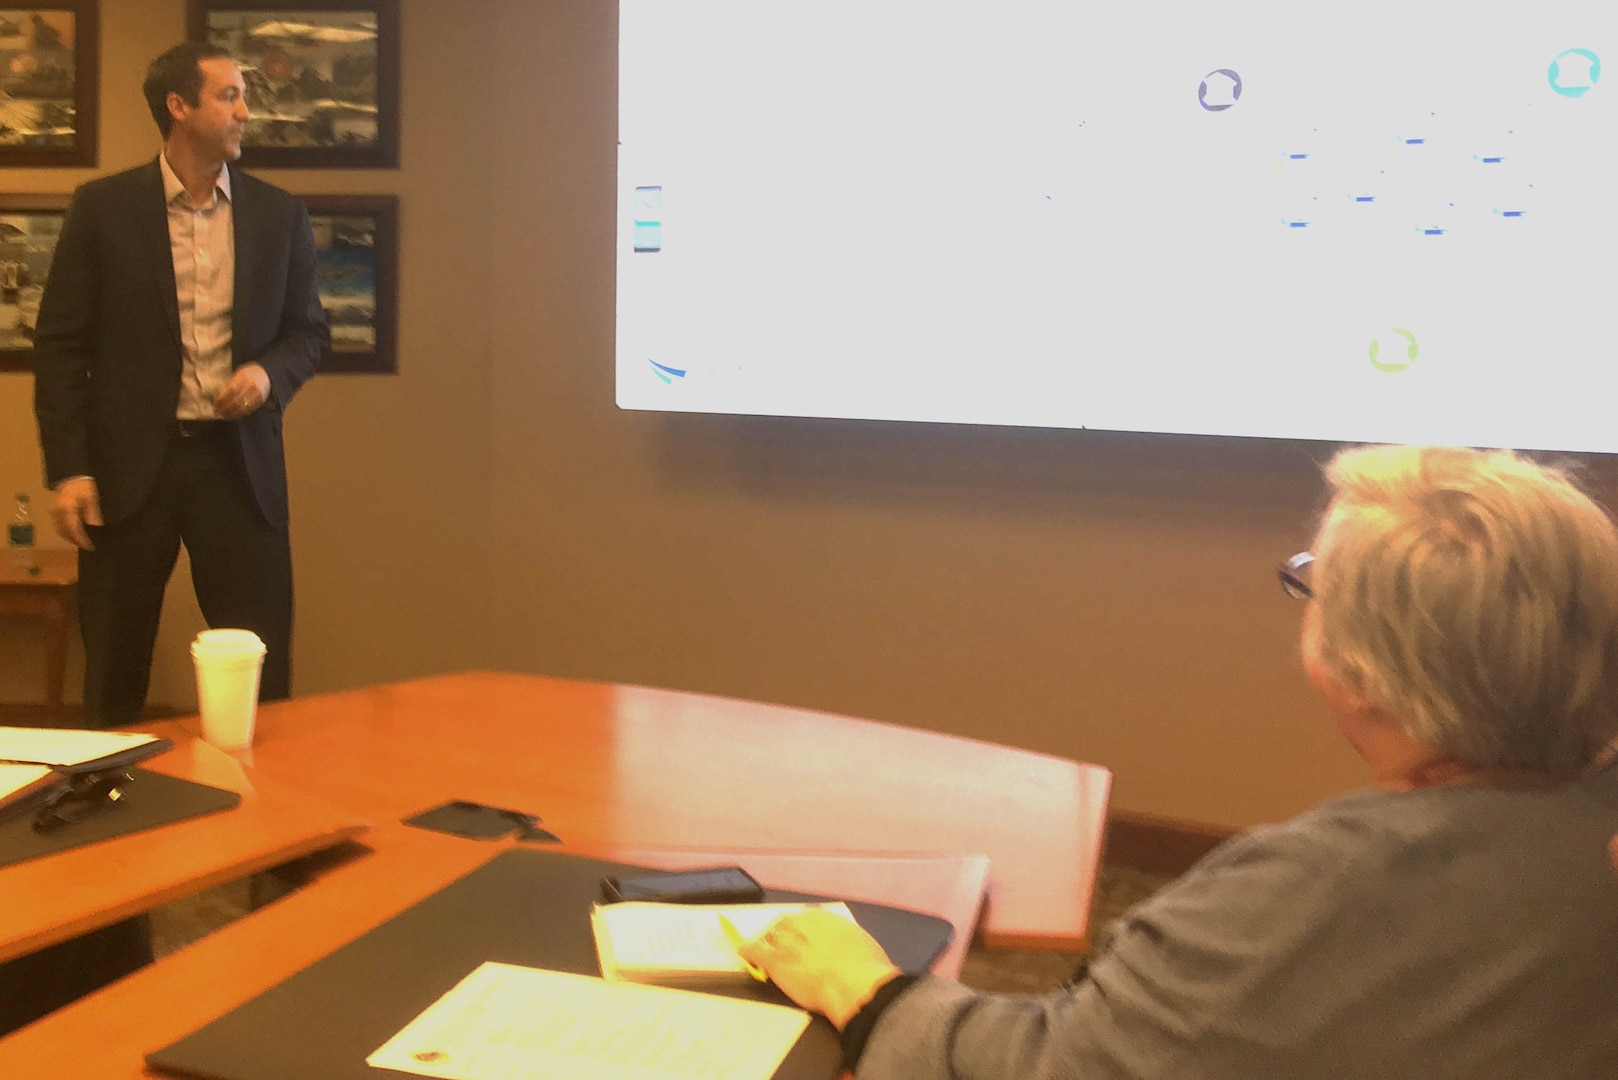 Craig Fischer (left), program manager with the Department of the Treasury’s Financial Innovation and Transformation Office, shares lessons learned from a blockchain pilot with DLA Troop Support leaders including Product Test Center-Analytical supervisor Jamie Hieber (right) at a meeting Dec. 3 in Philadelphia.